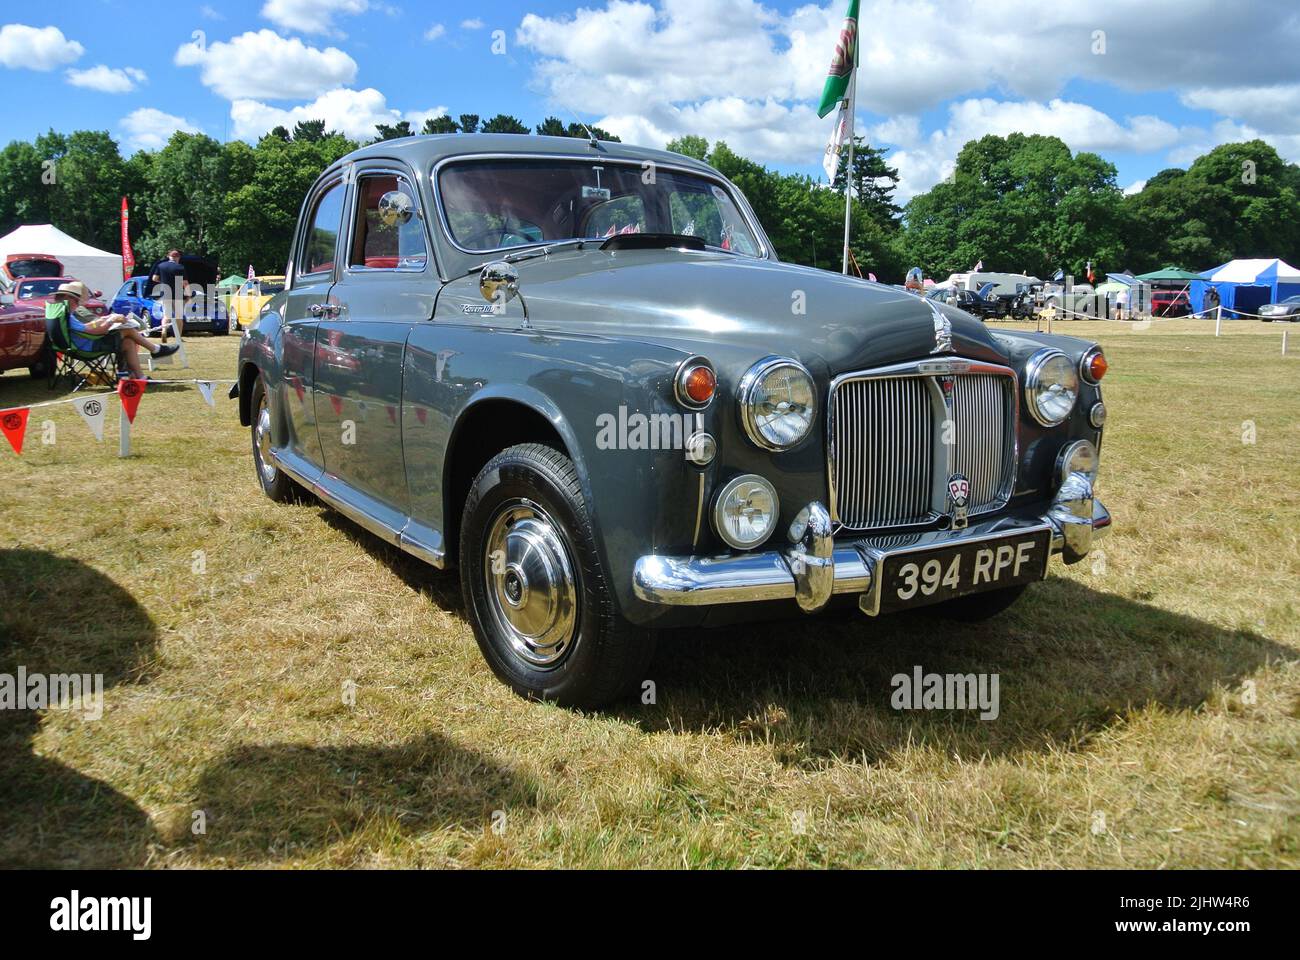 A 1960 Rover 100 parked on display at the 47th Historic Vehicle Gathering classic car show, Powderham, Devon, England, UK. Stock Photo